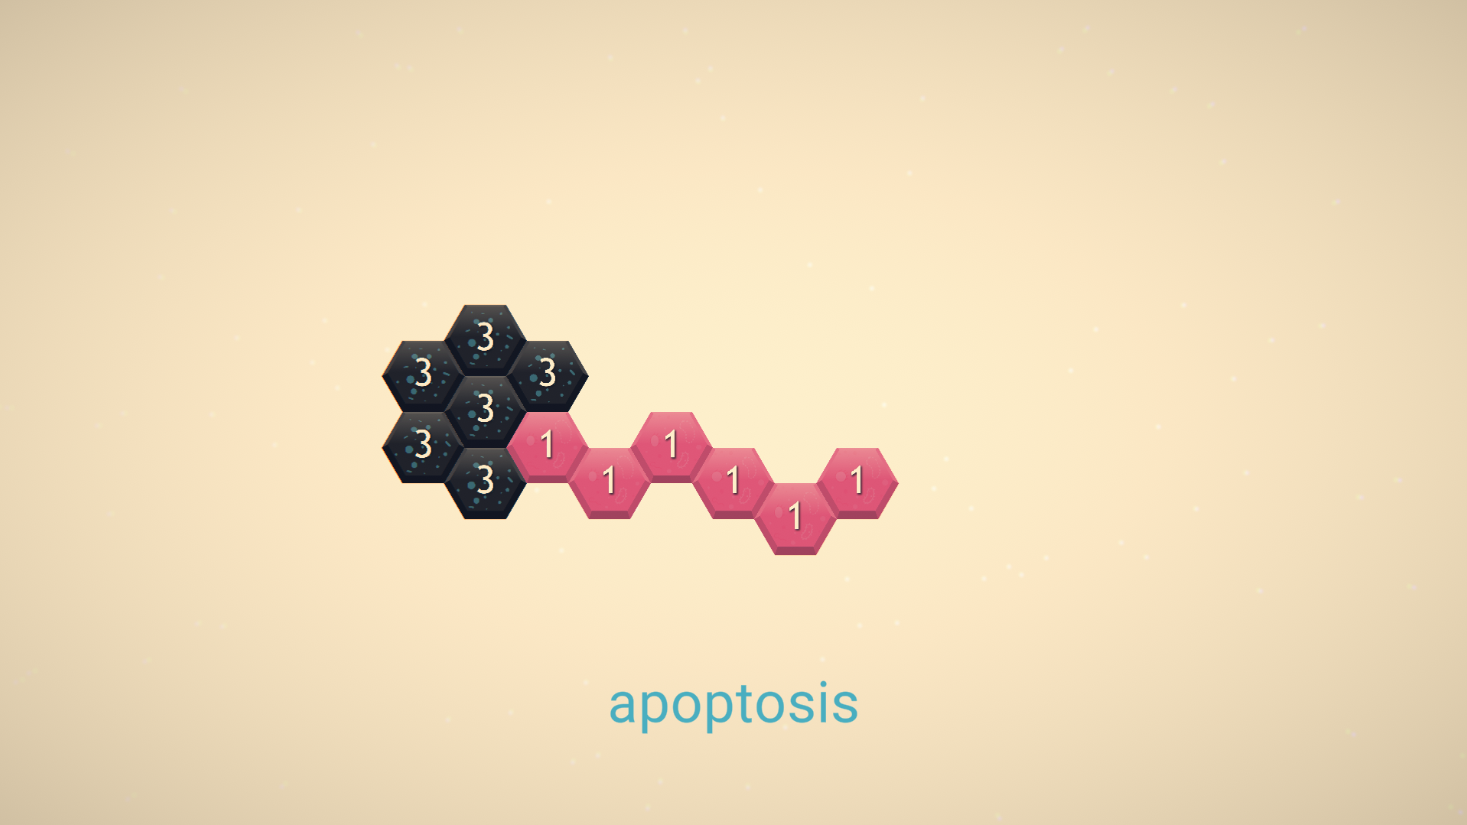 Apoptosis – a minimalist puzzle game about death